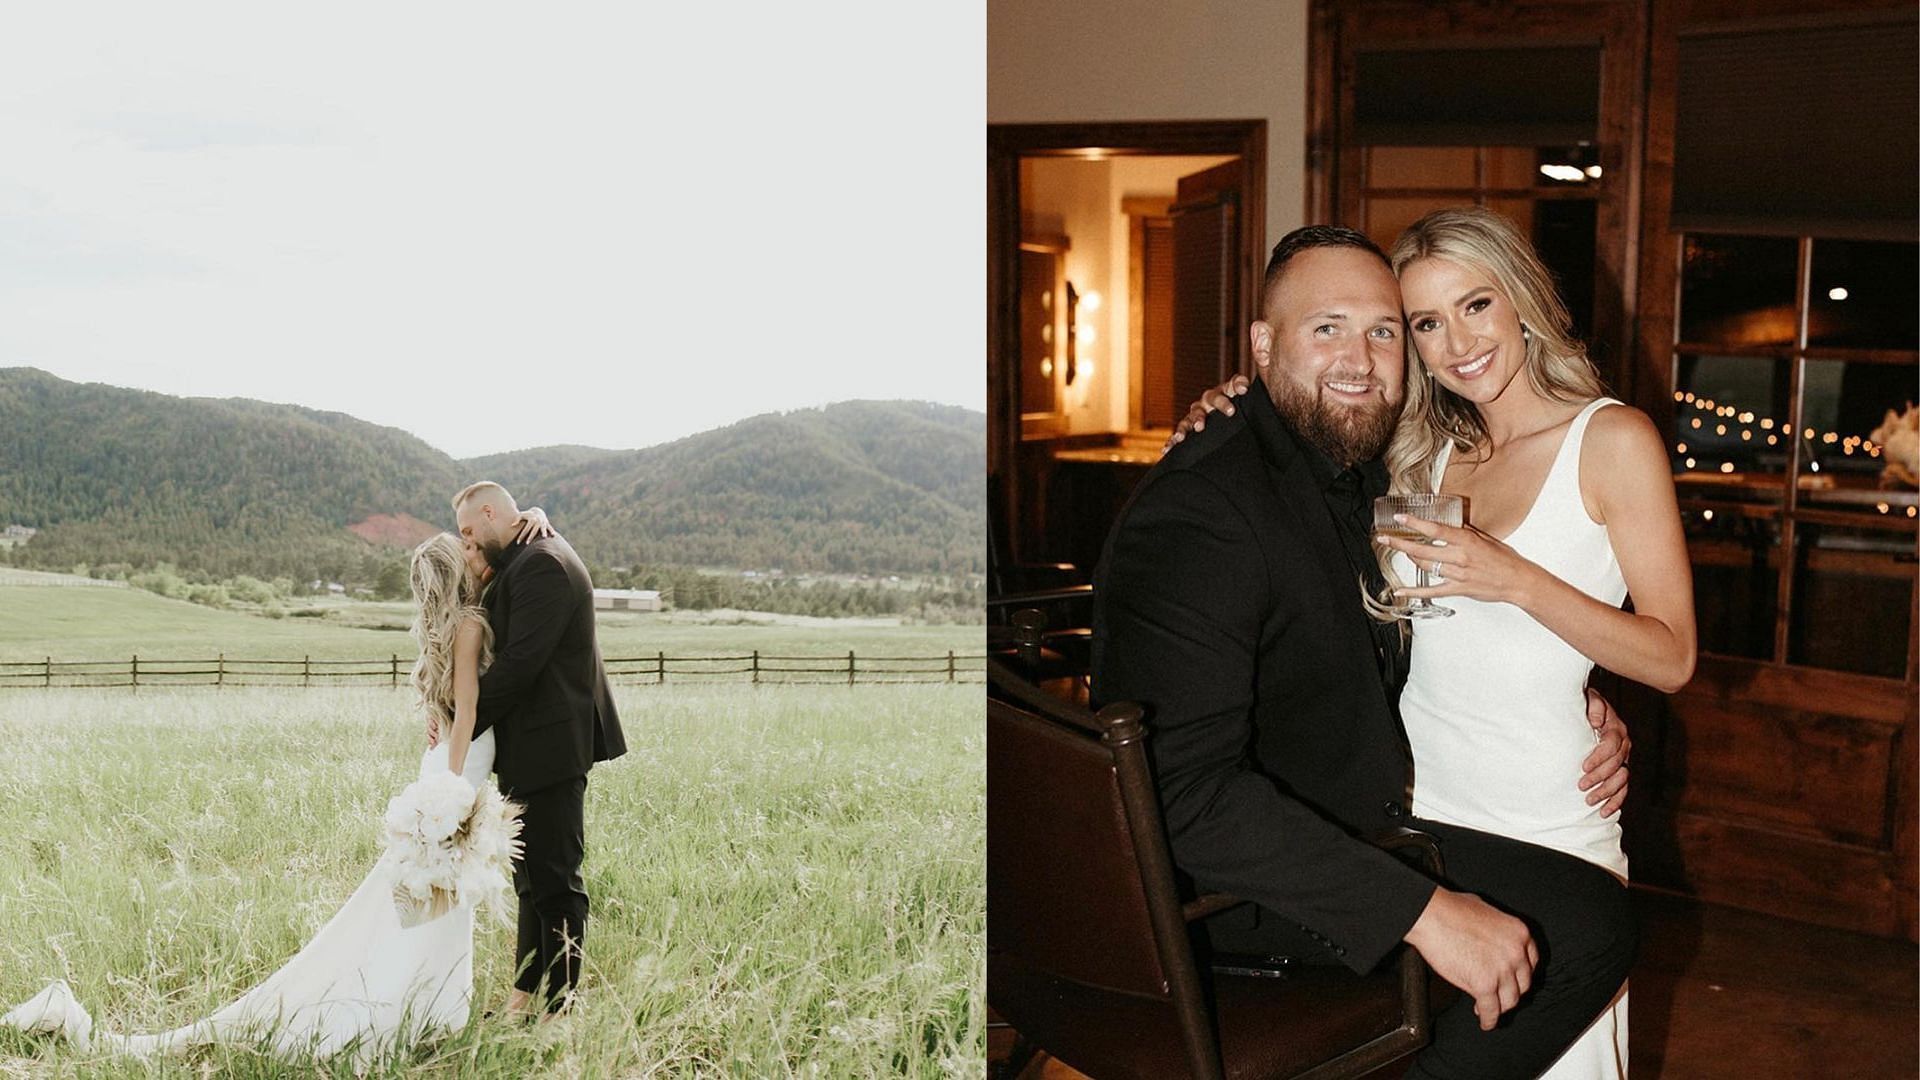 Dalton Riser and wife celebrate their first anniversary. 